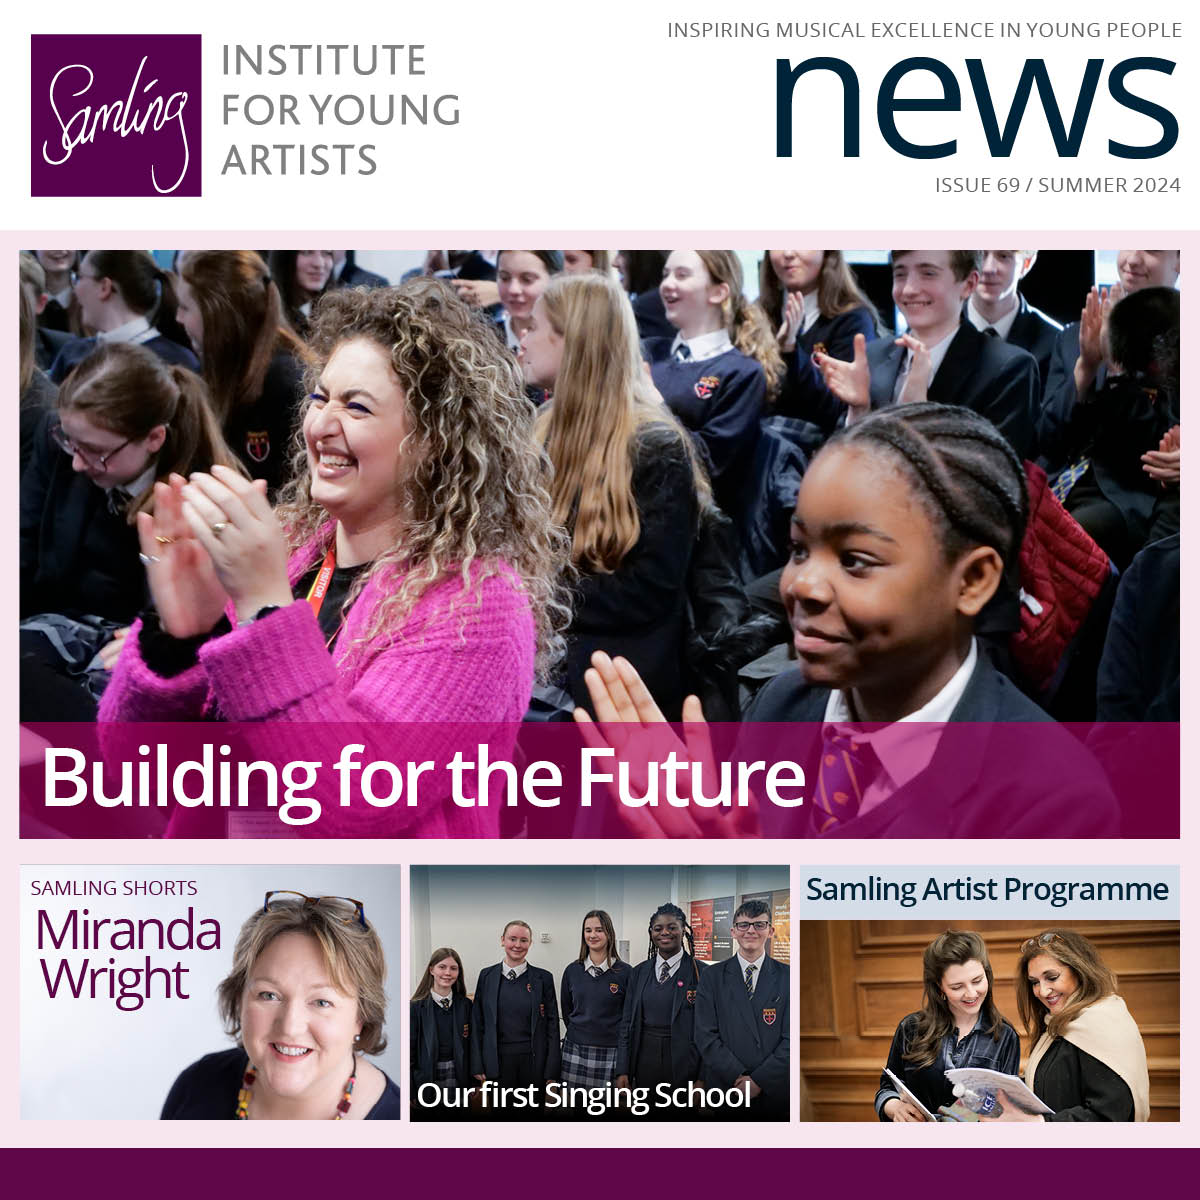 Our latest newsletter is out! Featuring school visits with @AnushH_Soprano @AitkenKatherine @NickPritch89 & @ellaloupianist, our first Singing School @EgglescliffeSCH, Samling Shorts with @MWright_singers and the Artist Programme at @MarchmontEstate samling.org.uk/news/newslette…